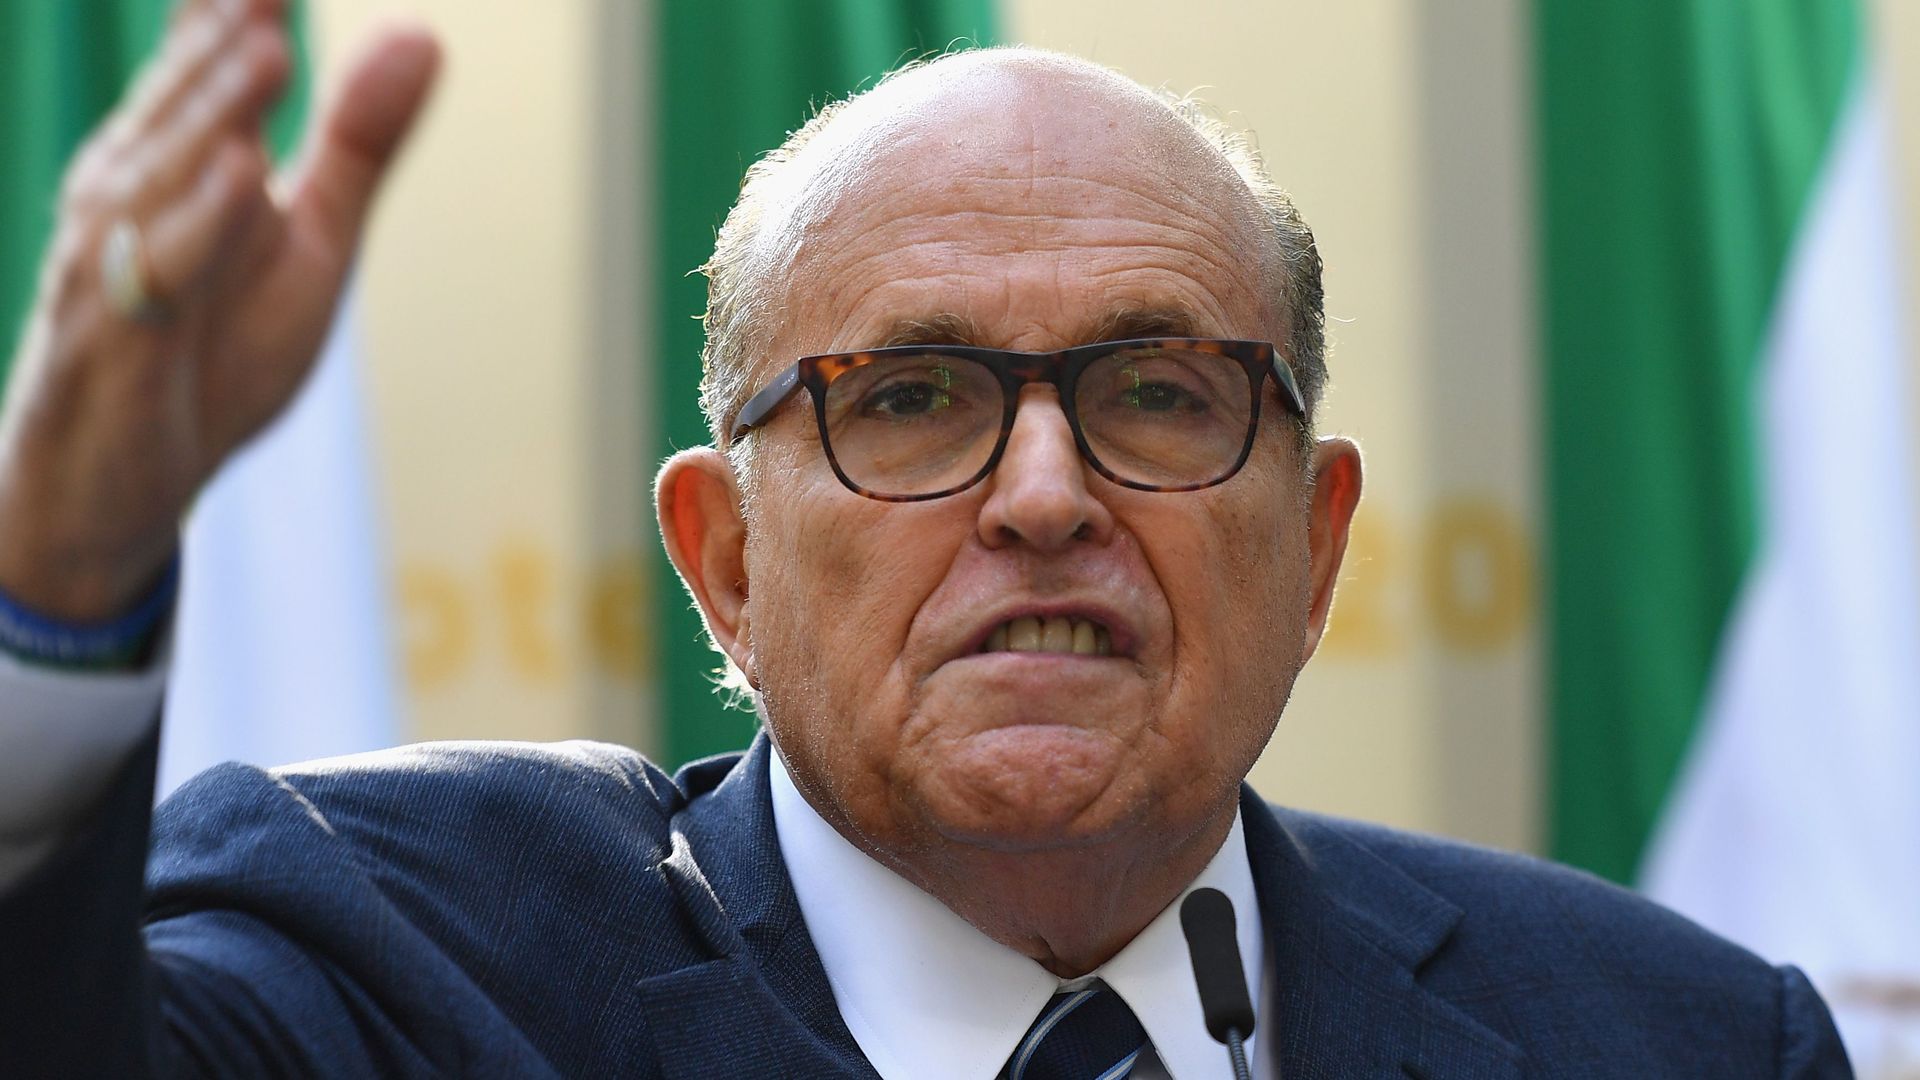 Giuliani gesturing with his hand.